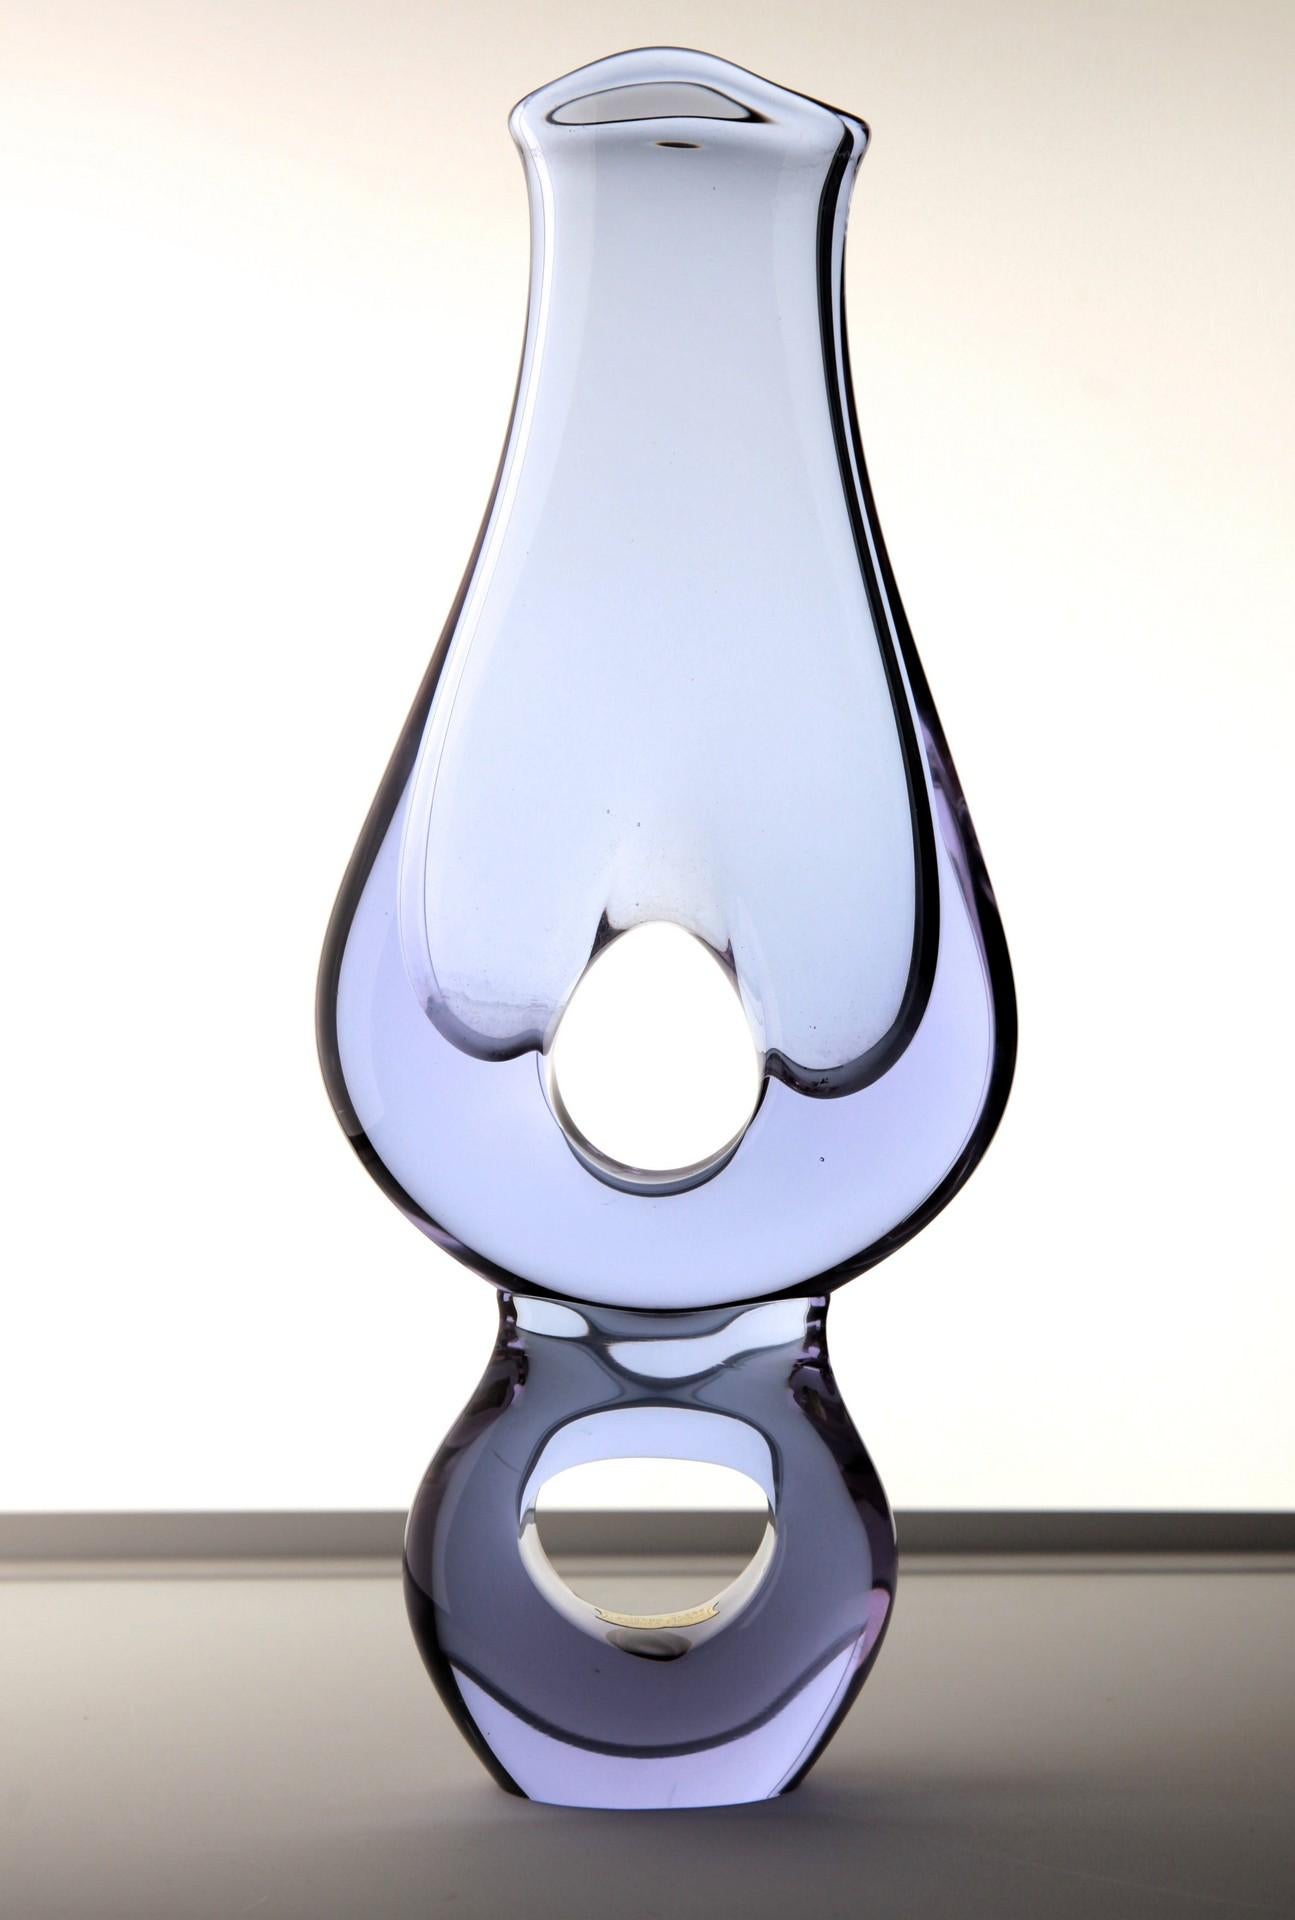 Gino Cenedese unique vase. Uses one of the colors that Cenedese and Da Ros loved the most. In Murano is called Alessandrite, also known as Neodymium glass.
As Alessandrite gemstone and for the same principle, the glass changes its color depending on